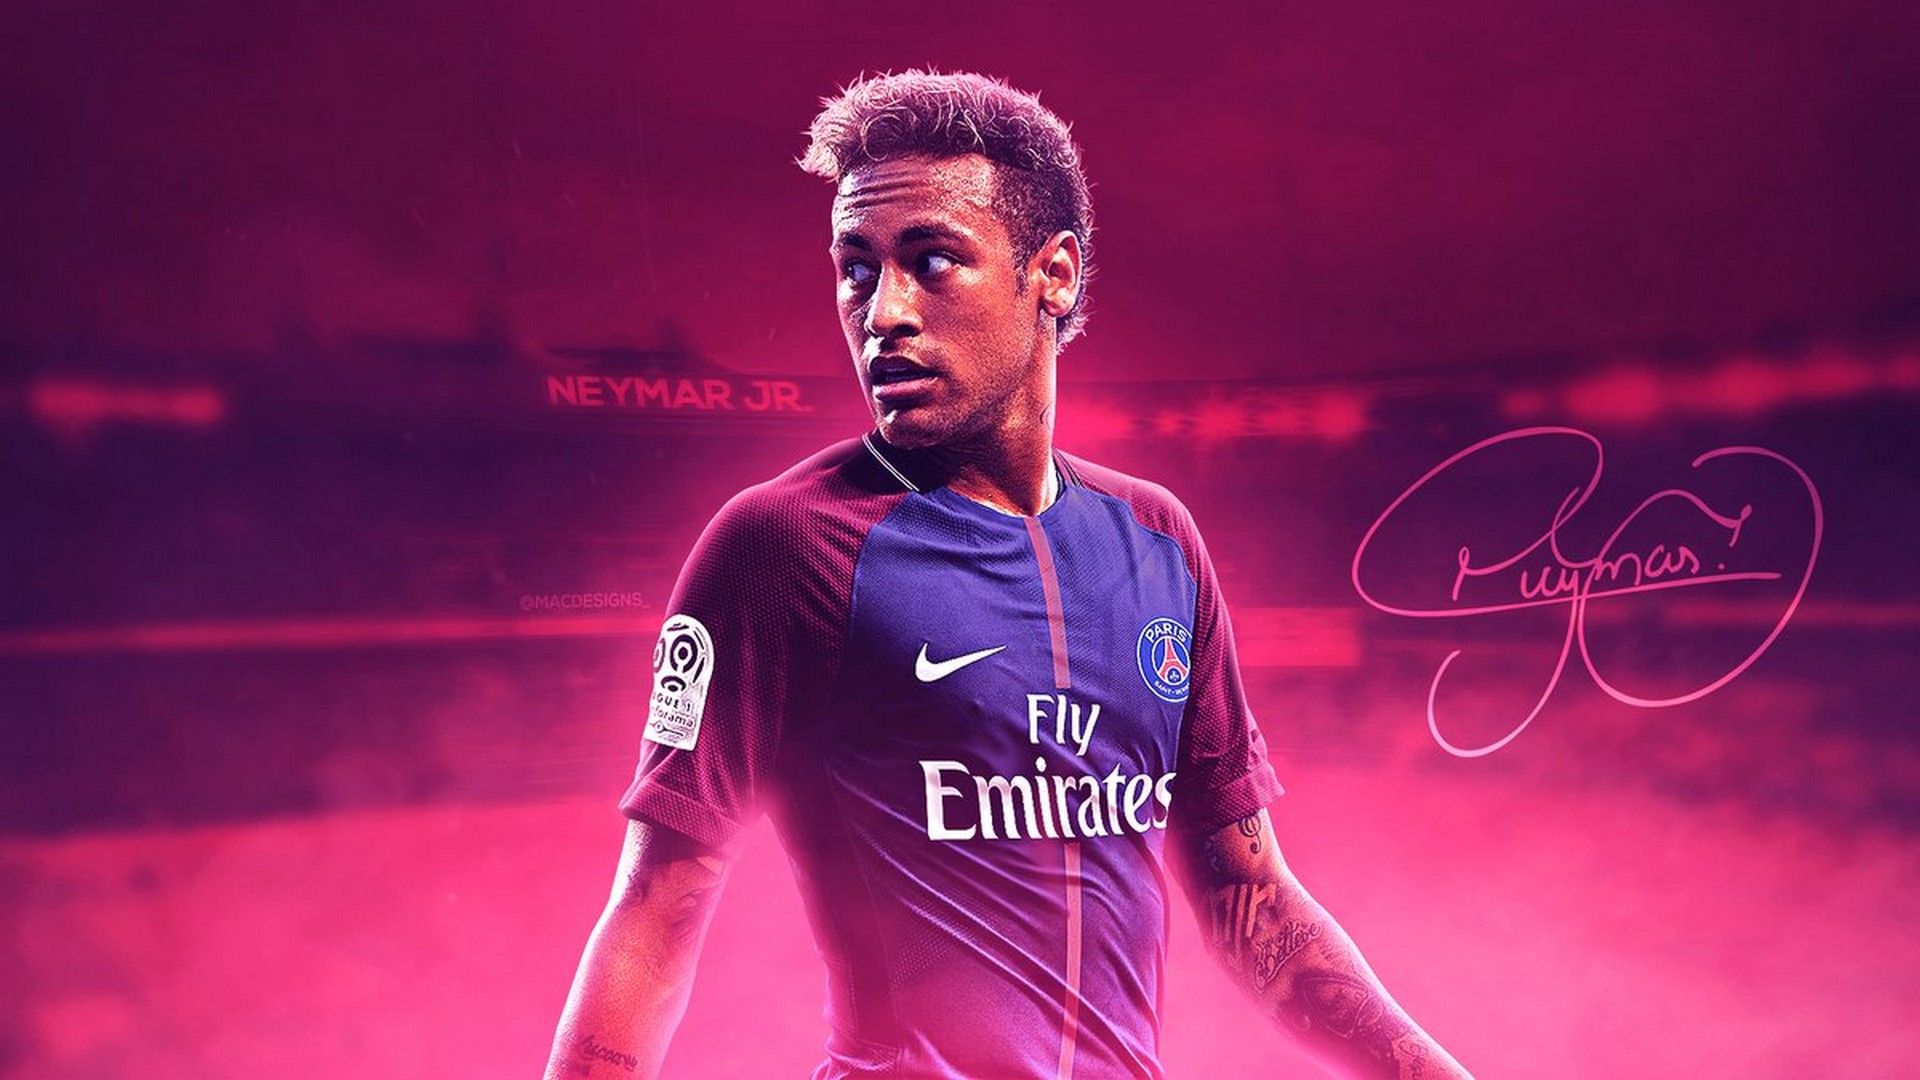 Desktop Wallpaper Neymar with resolution 1920X1080 pixel. You can use this wallpaper as background for your desktop Computer Screensavers, Android or iPhone smartphones